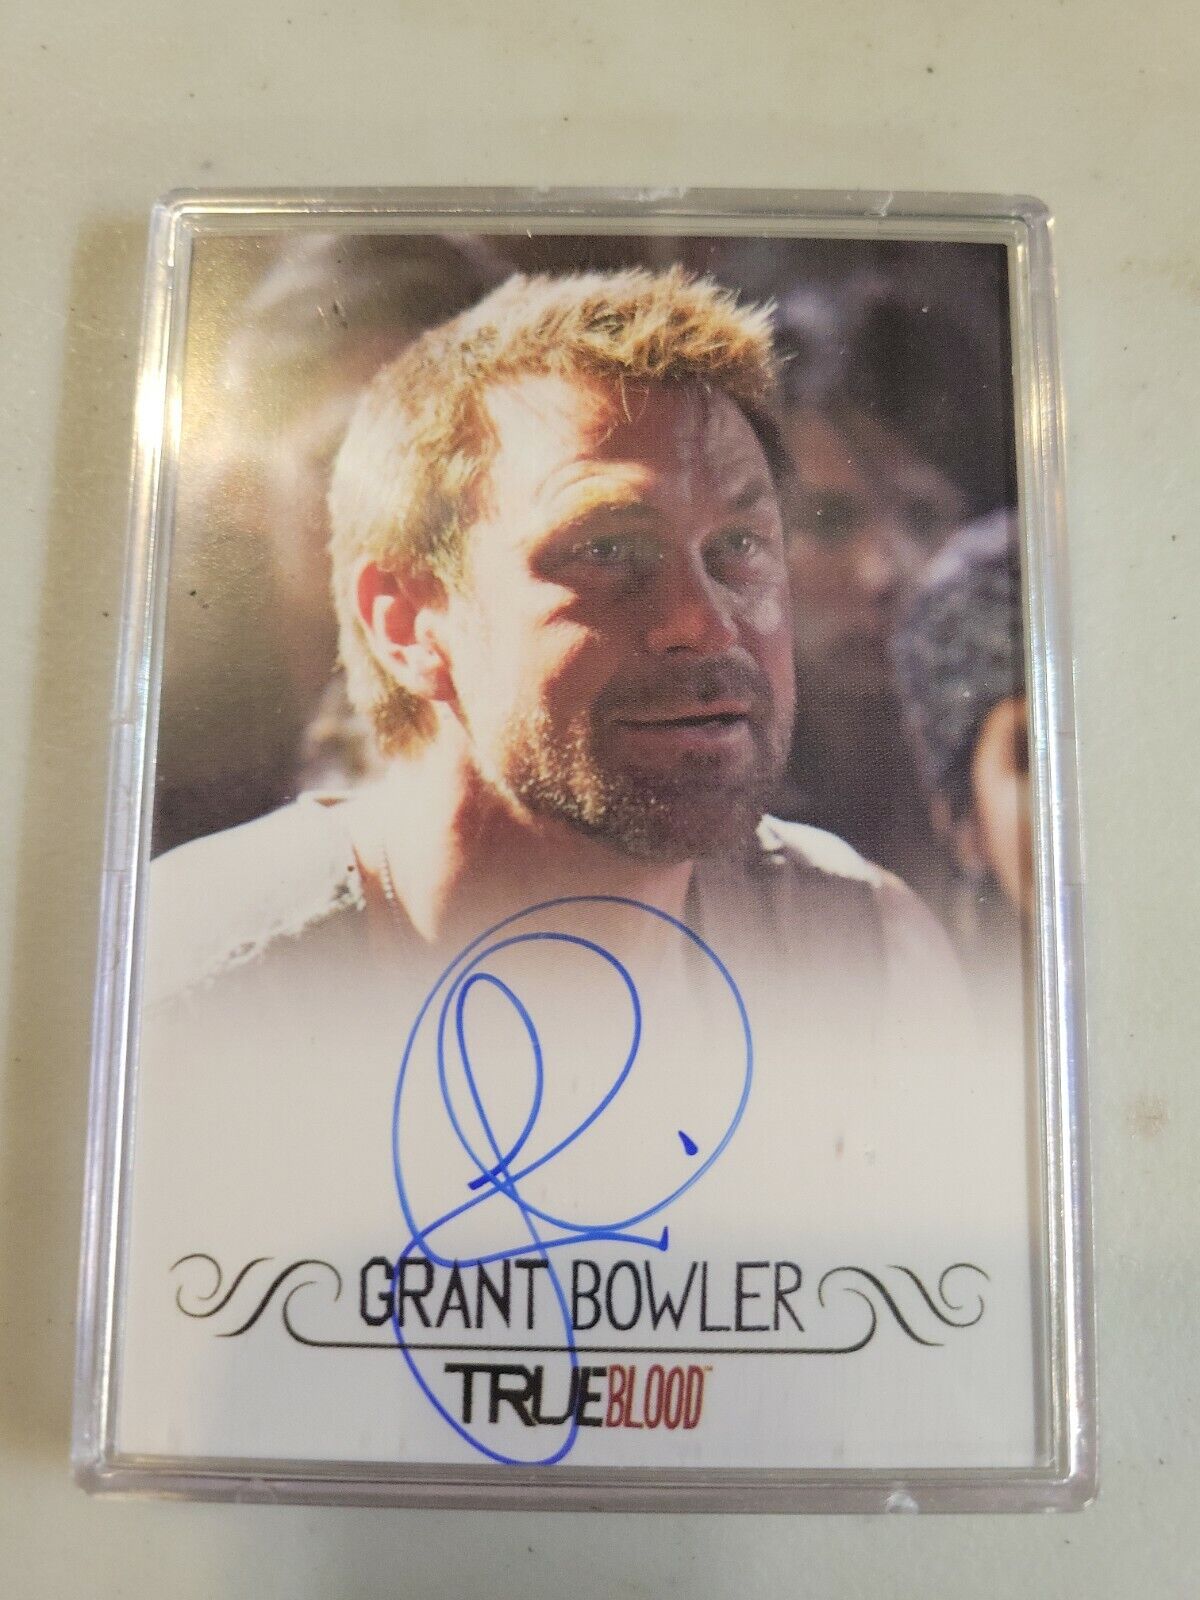 Rittenhouse 2013 True Blood Archives Autograph Card by Grant Bowler as Cooter